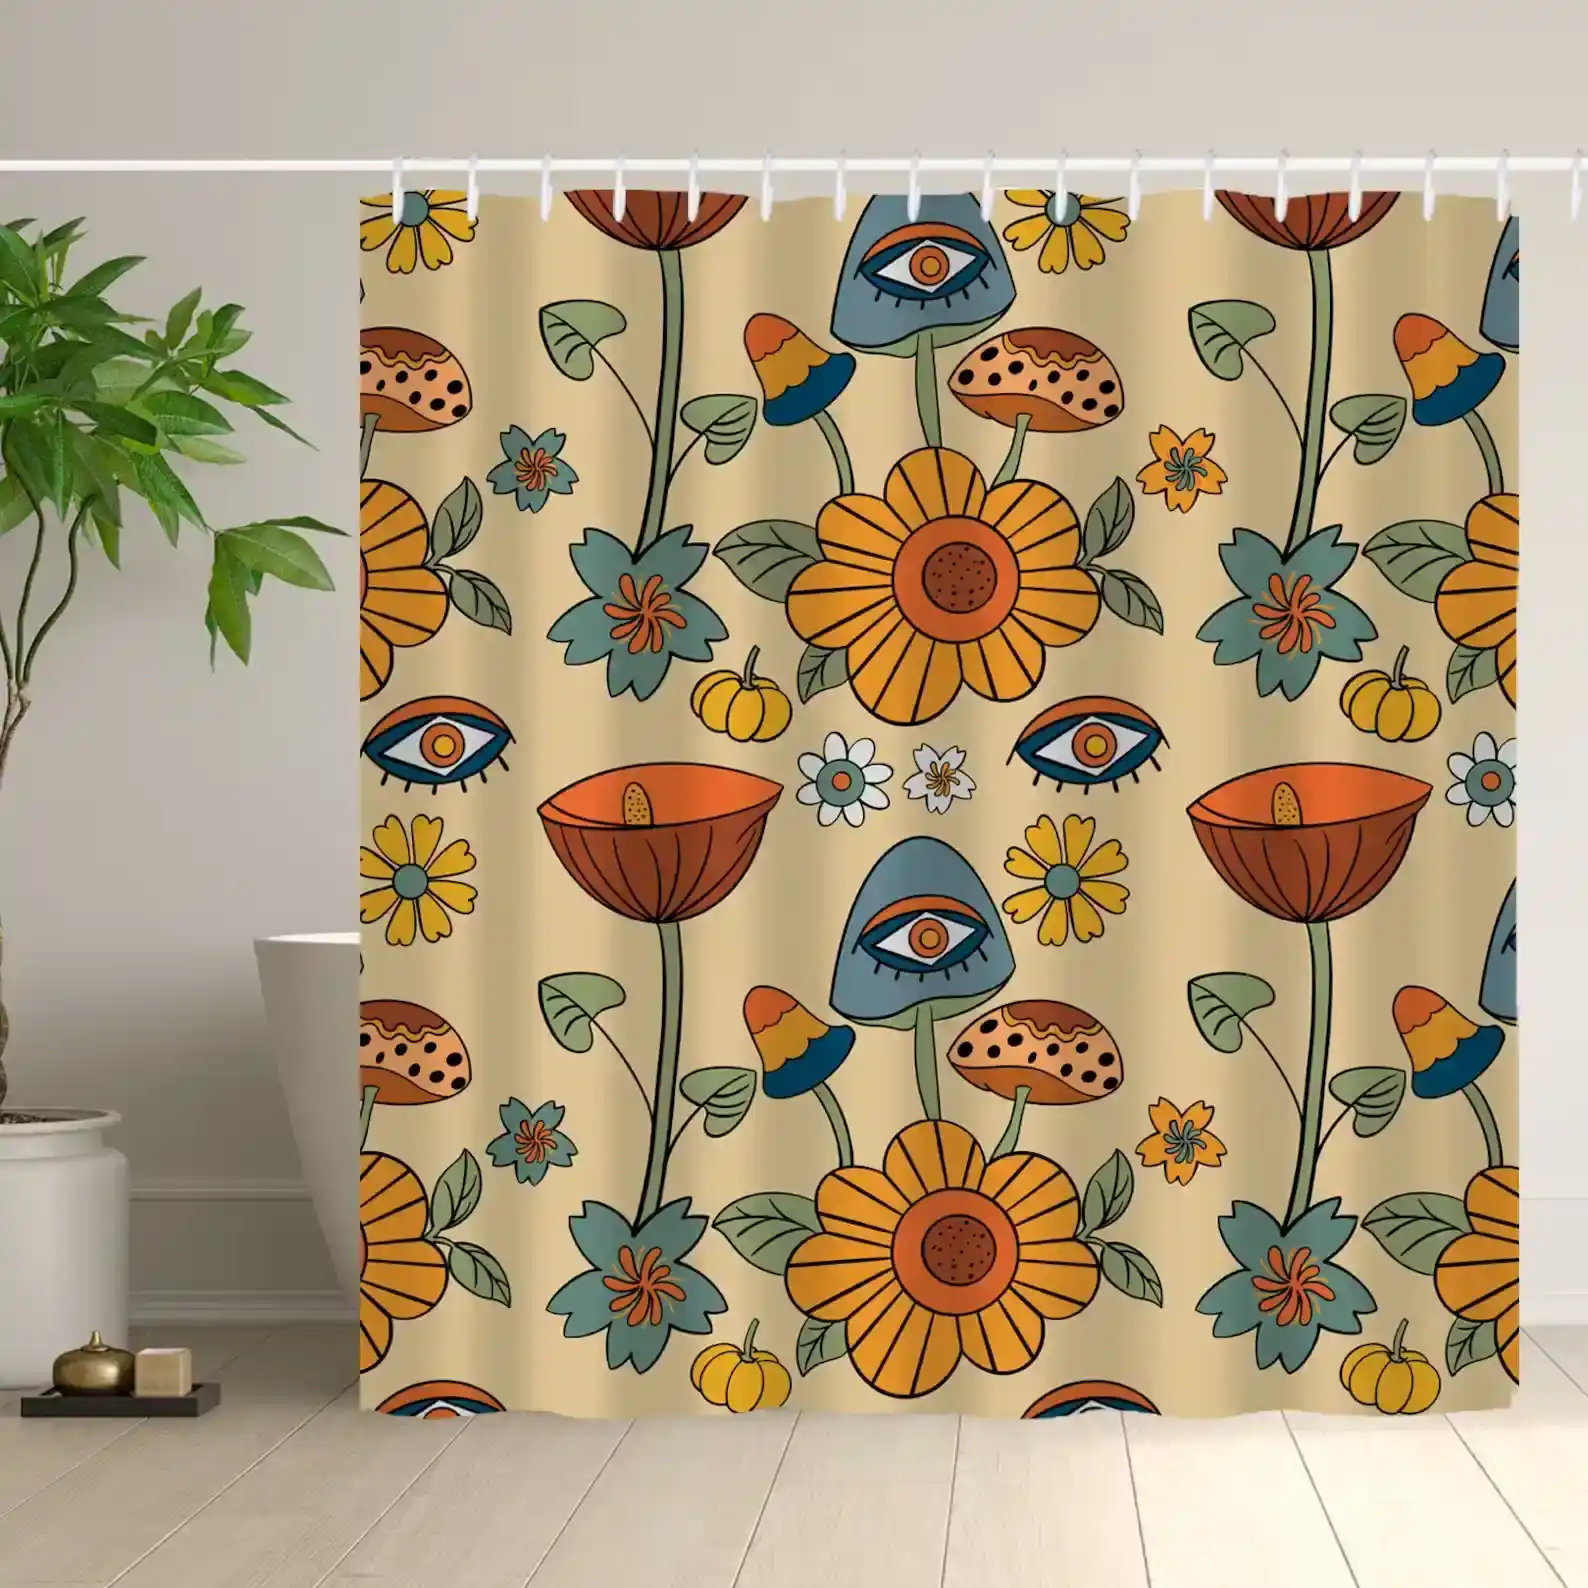 Guest bathroom shower curtain ideas: A shower curtain with an eye and flowers on it.